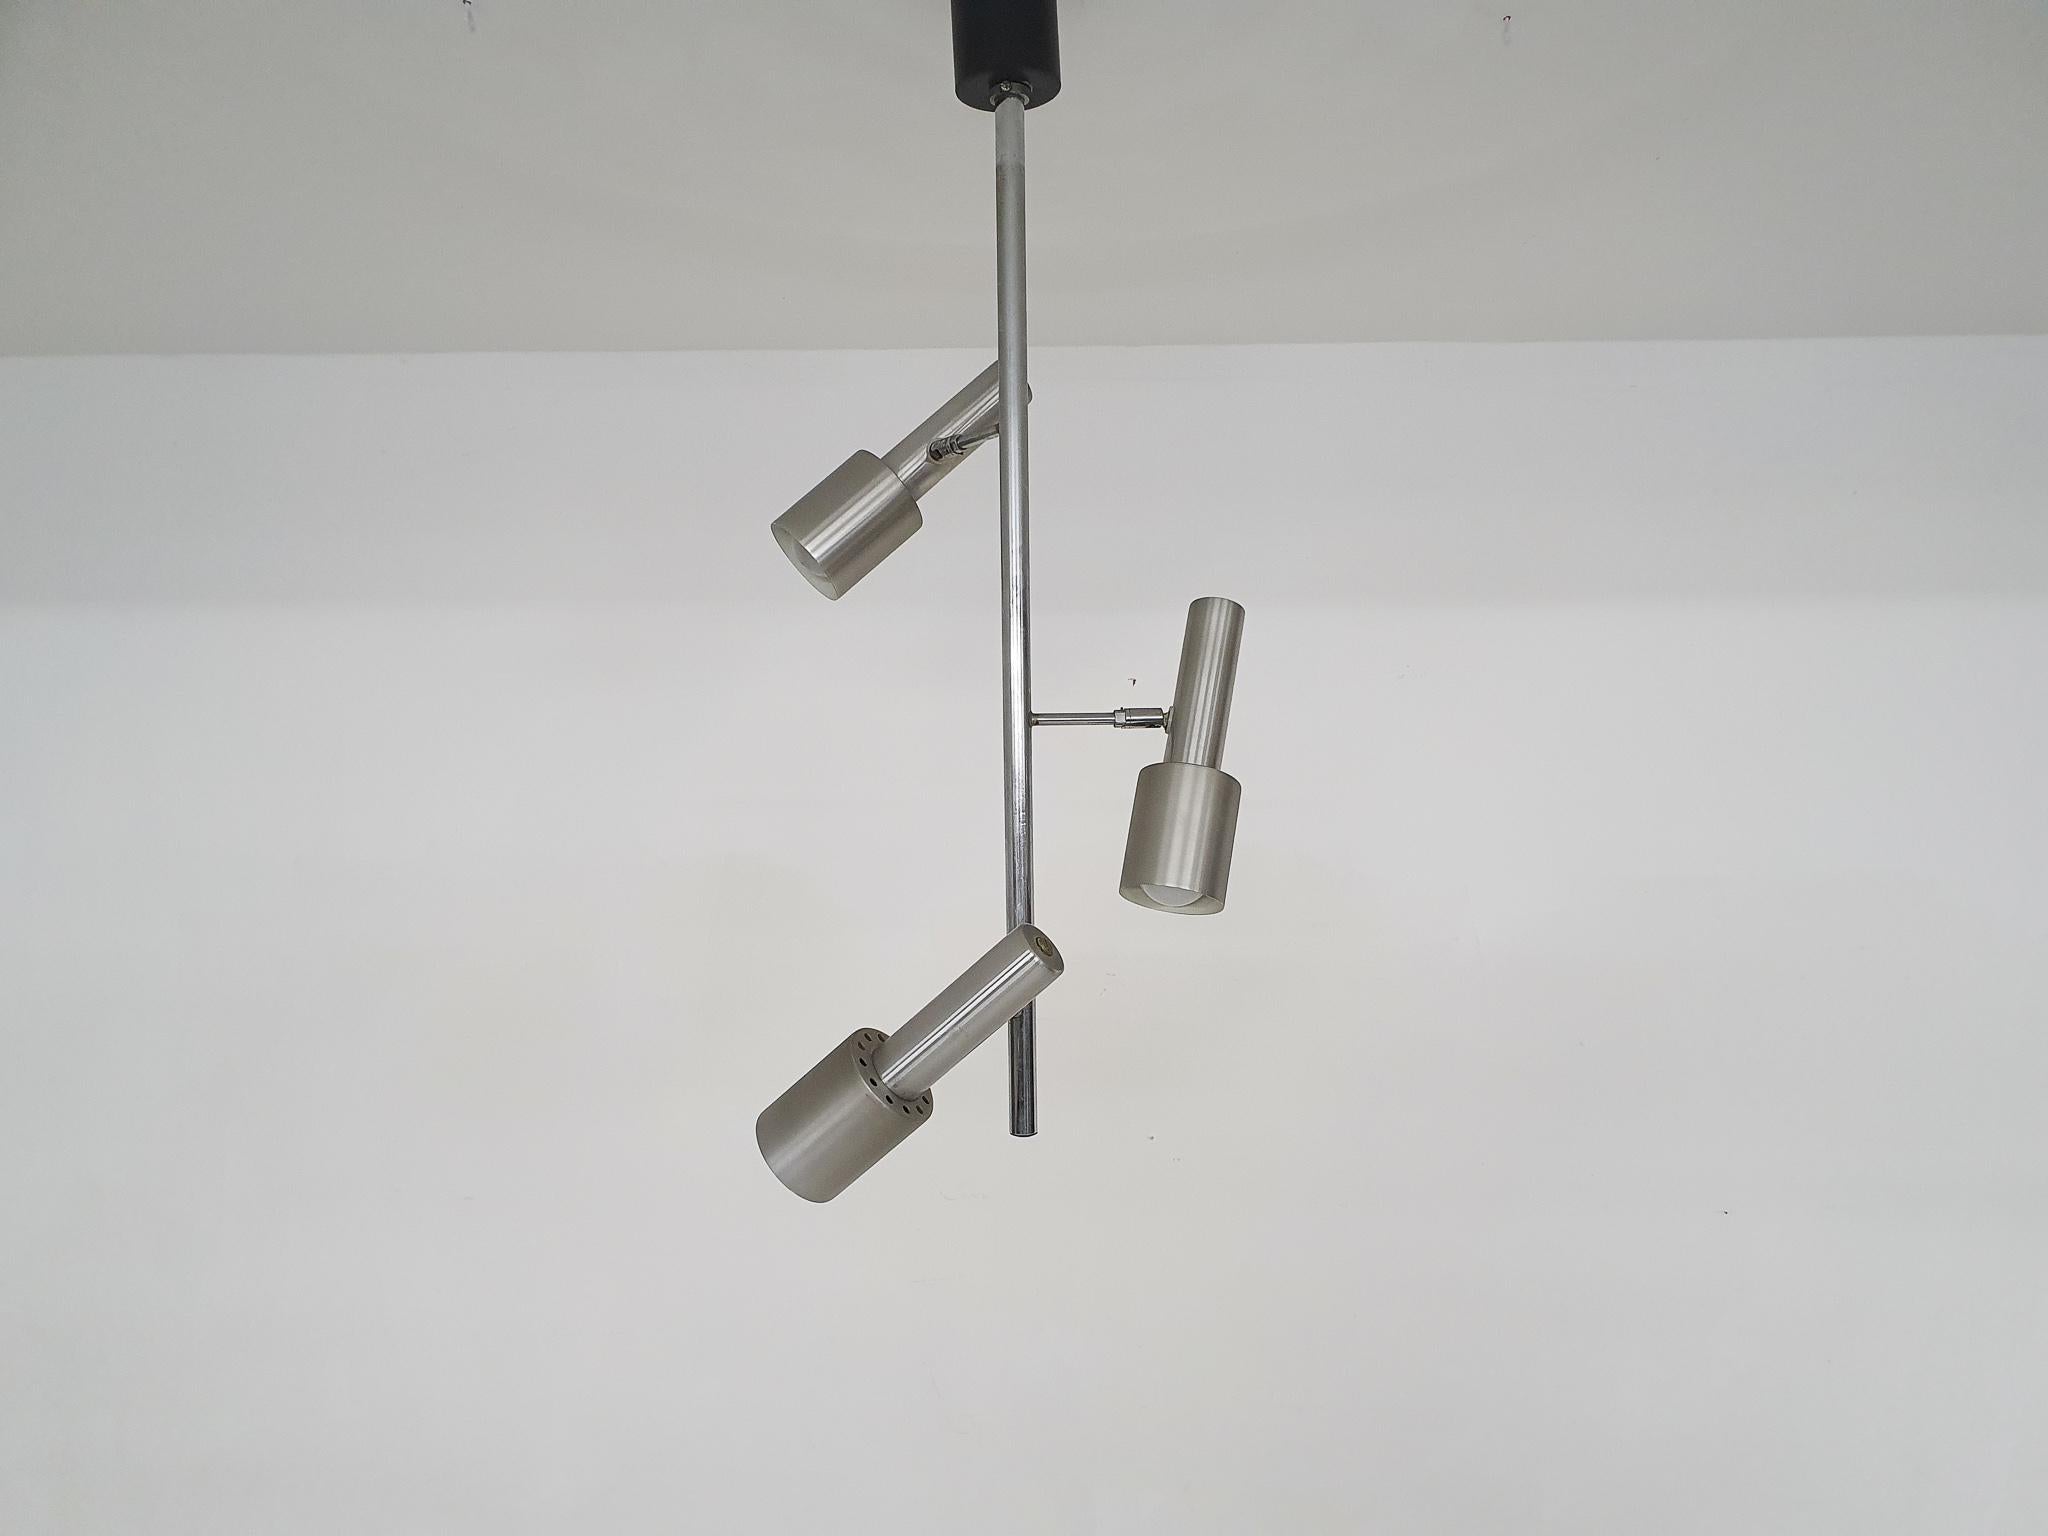 Minimalistic ceiling light. In the style of RAAK Amsterdam with three aluminum spots.